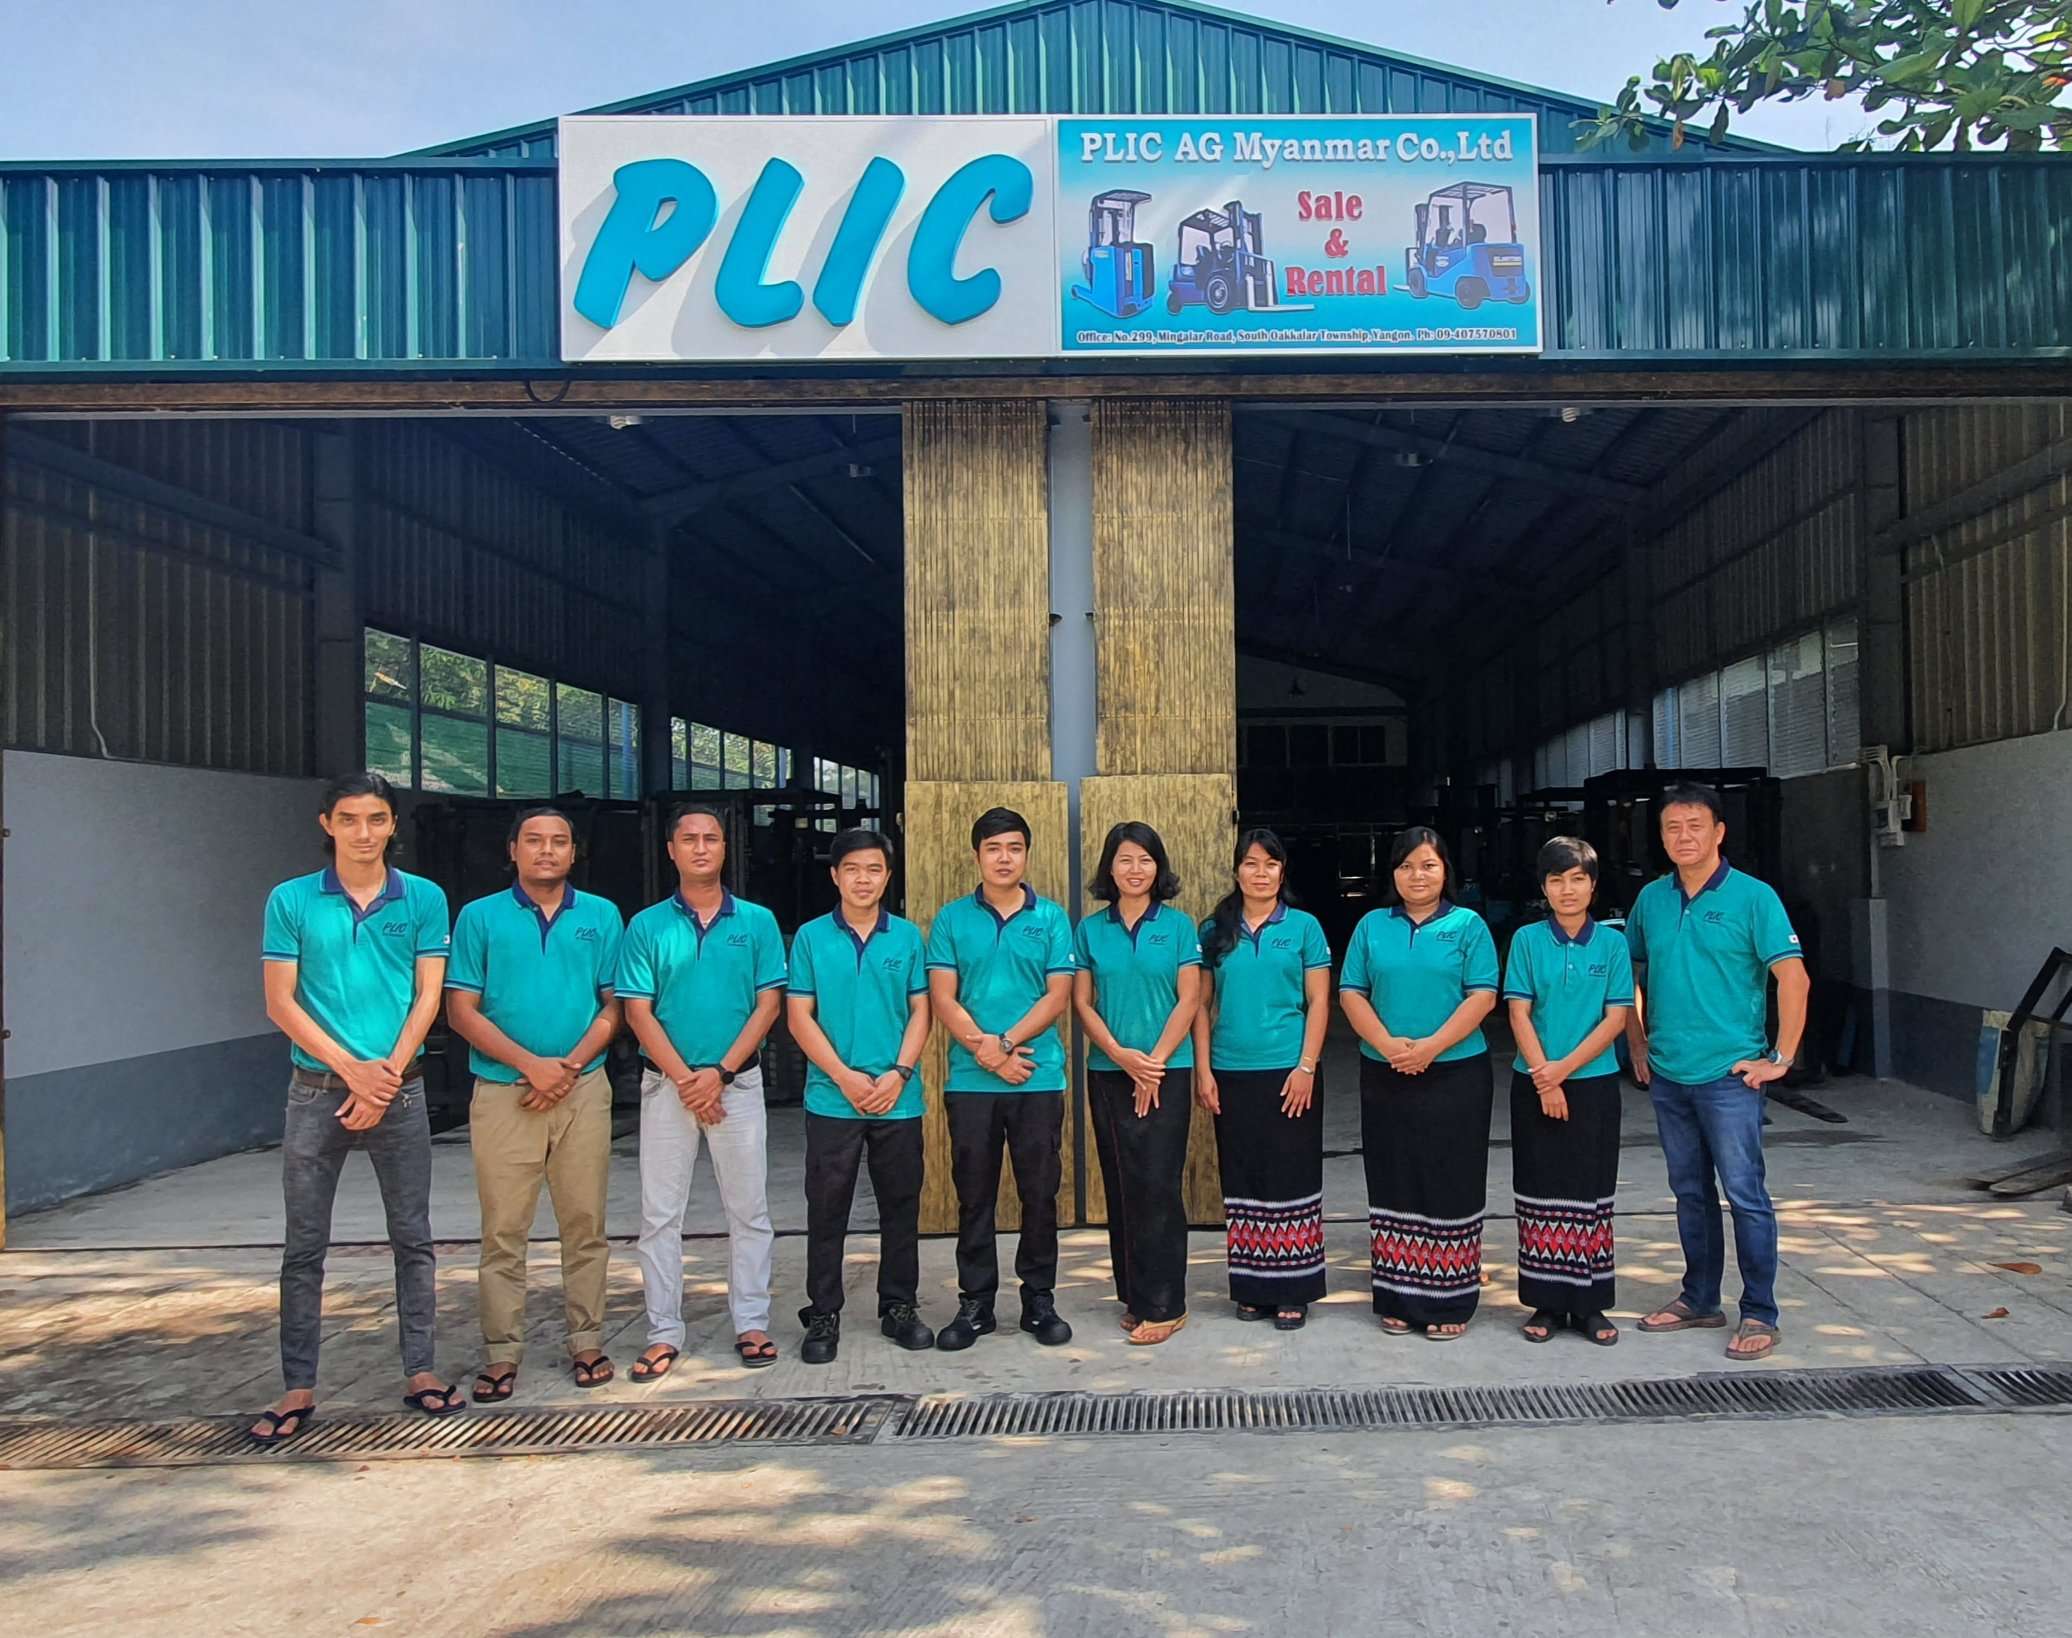 OUR STAFF IN PLIC AG MYANMAR